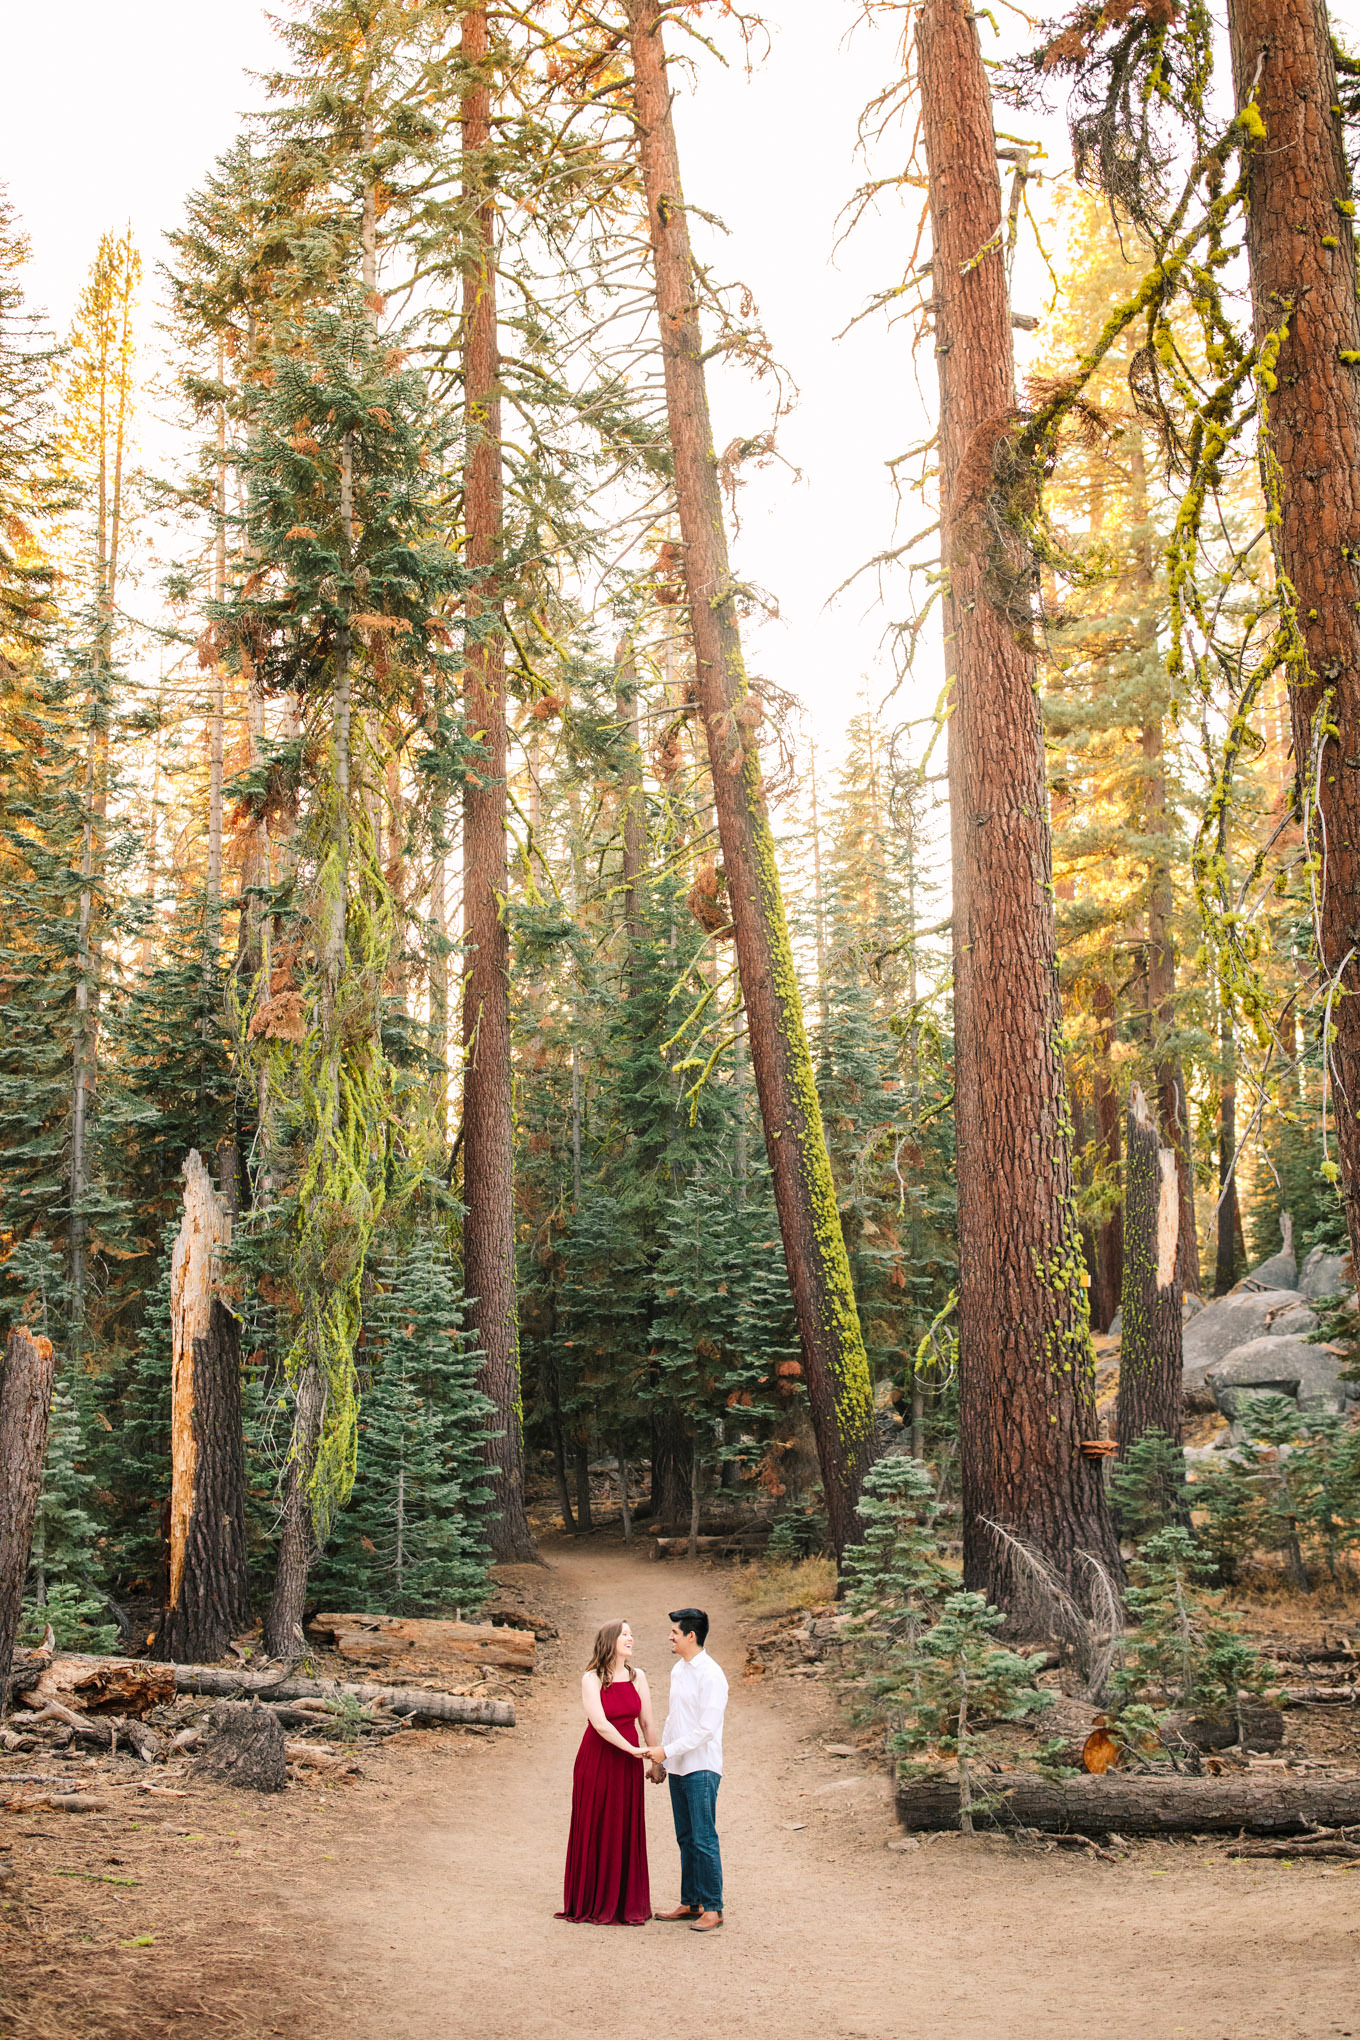 Yosemite National Park forest engagement session Los Angeles Chinatown engagement session | Engagement, elopement, and wedding photography roundup of Mary Costa’s favorite images from 2020 | Colorful and elevated photography for fun-loving couples in Southern California | #2020wedding #elopement #weddingphoto #weddingphotography #microwedding   Source: Mary Costa Photography | Los Angeles